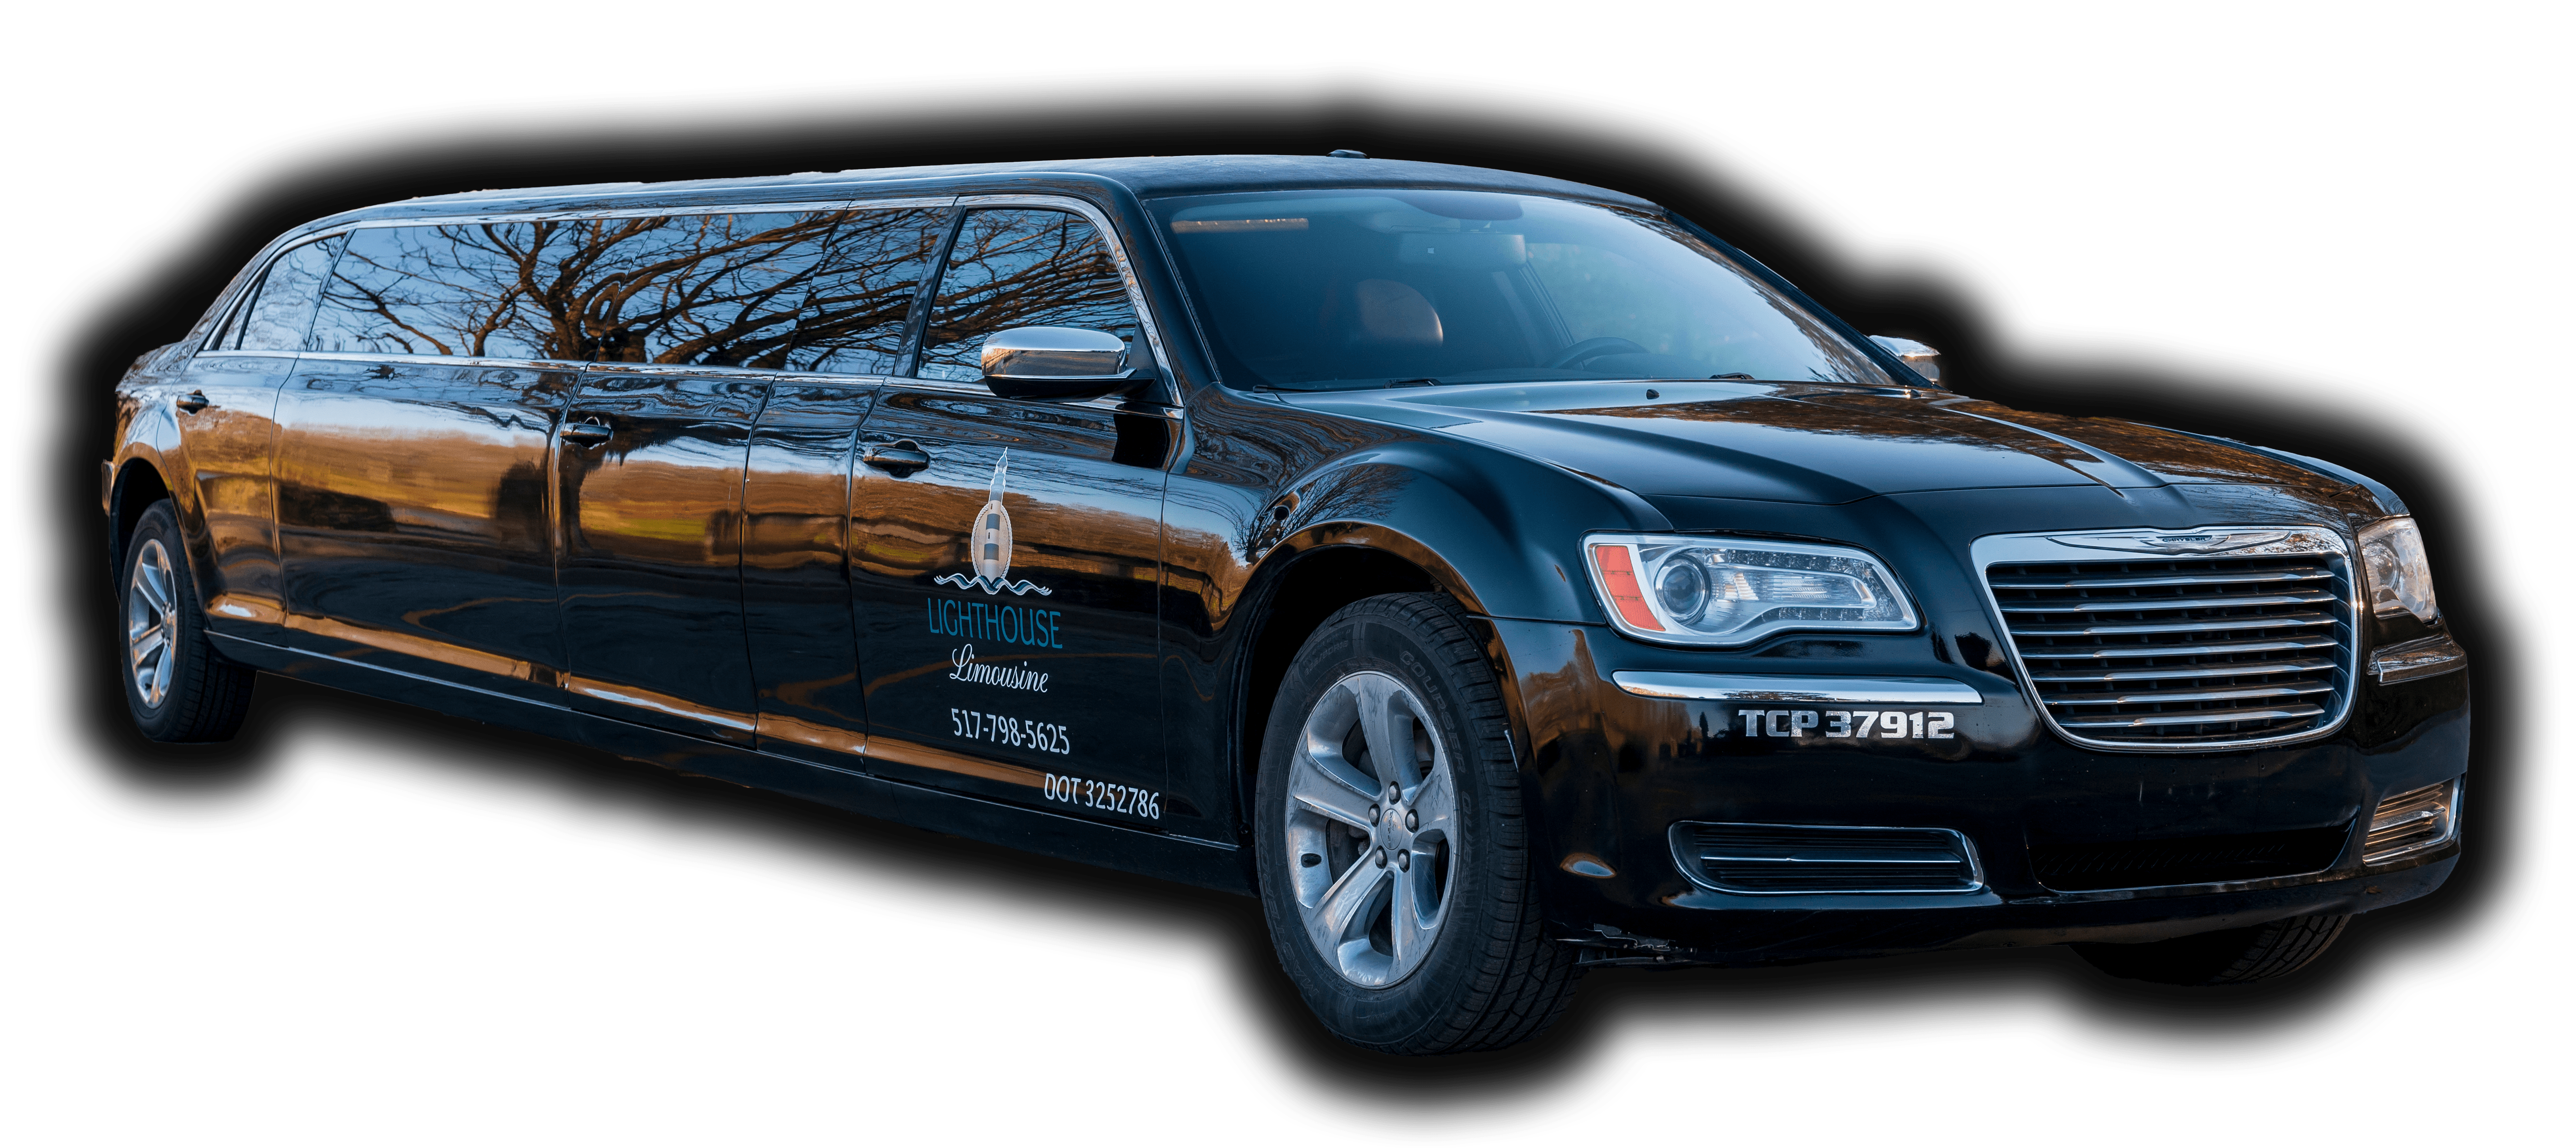 Copper Harbor Limo in Michigan - Lighthouse Limousine